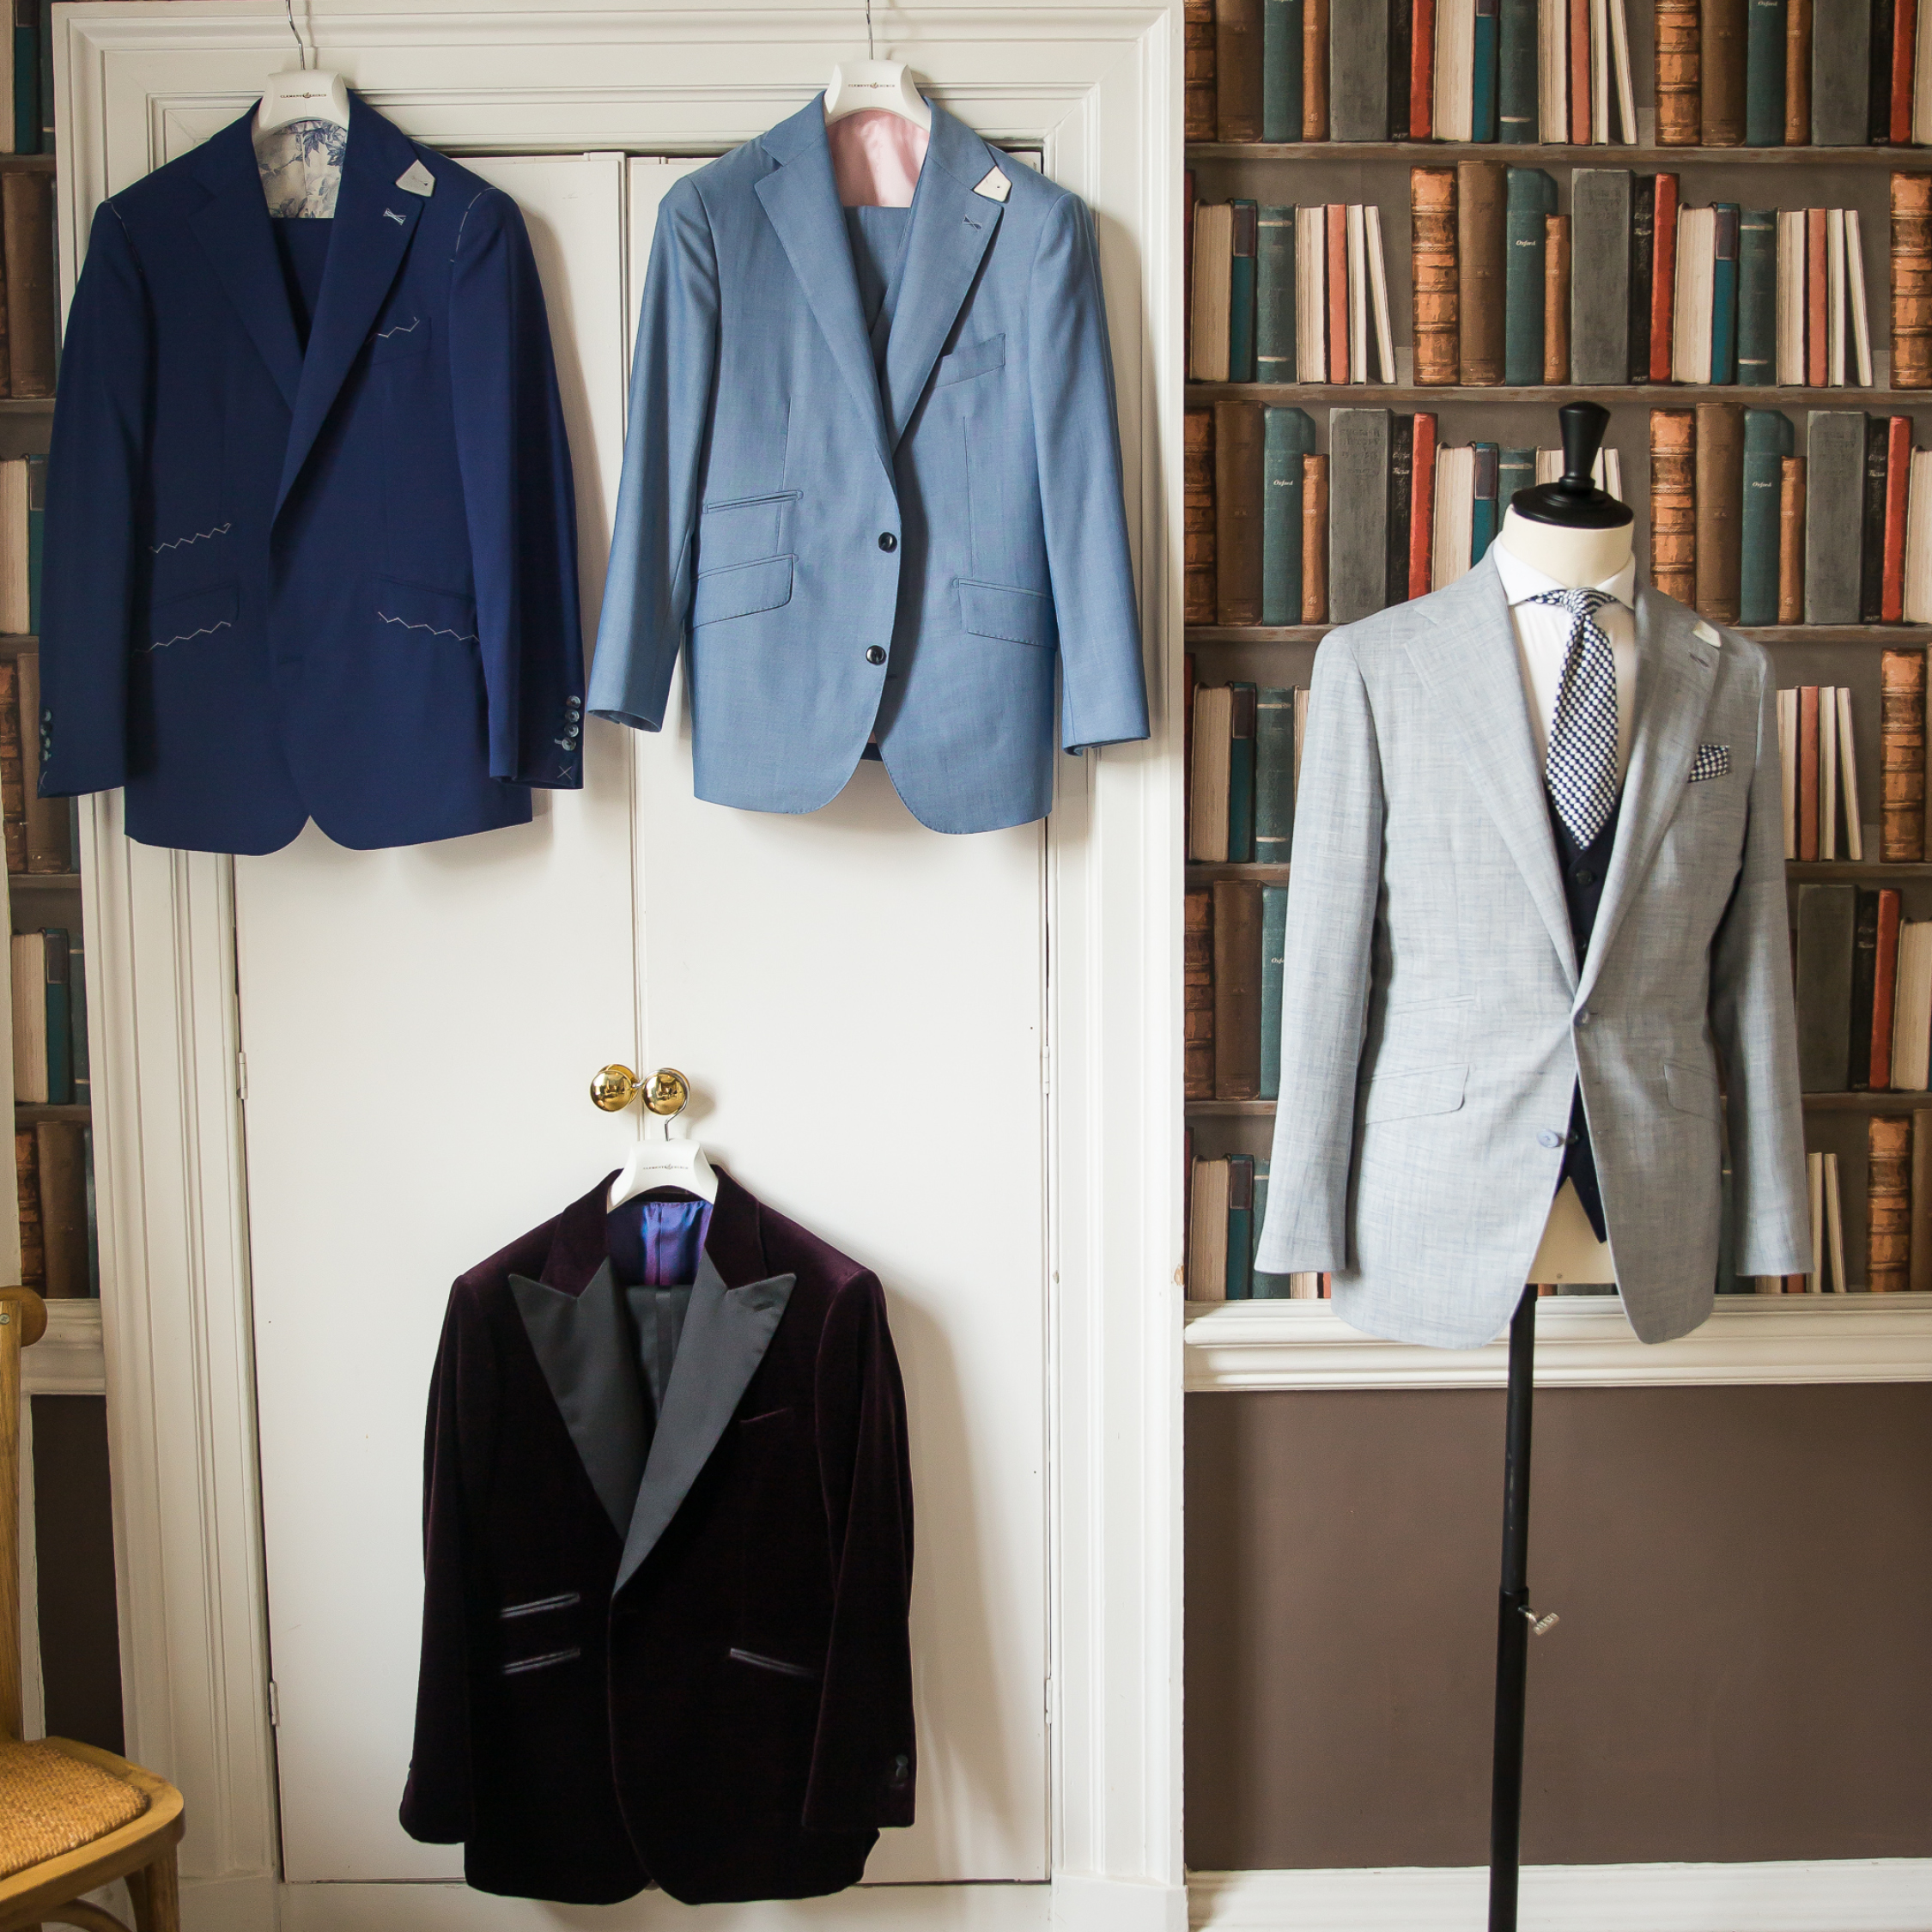 Hedsor House Augusta showcase recommended menswear